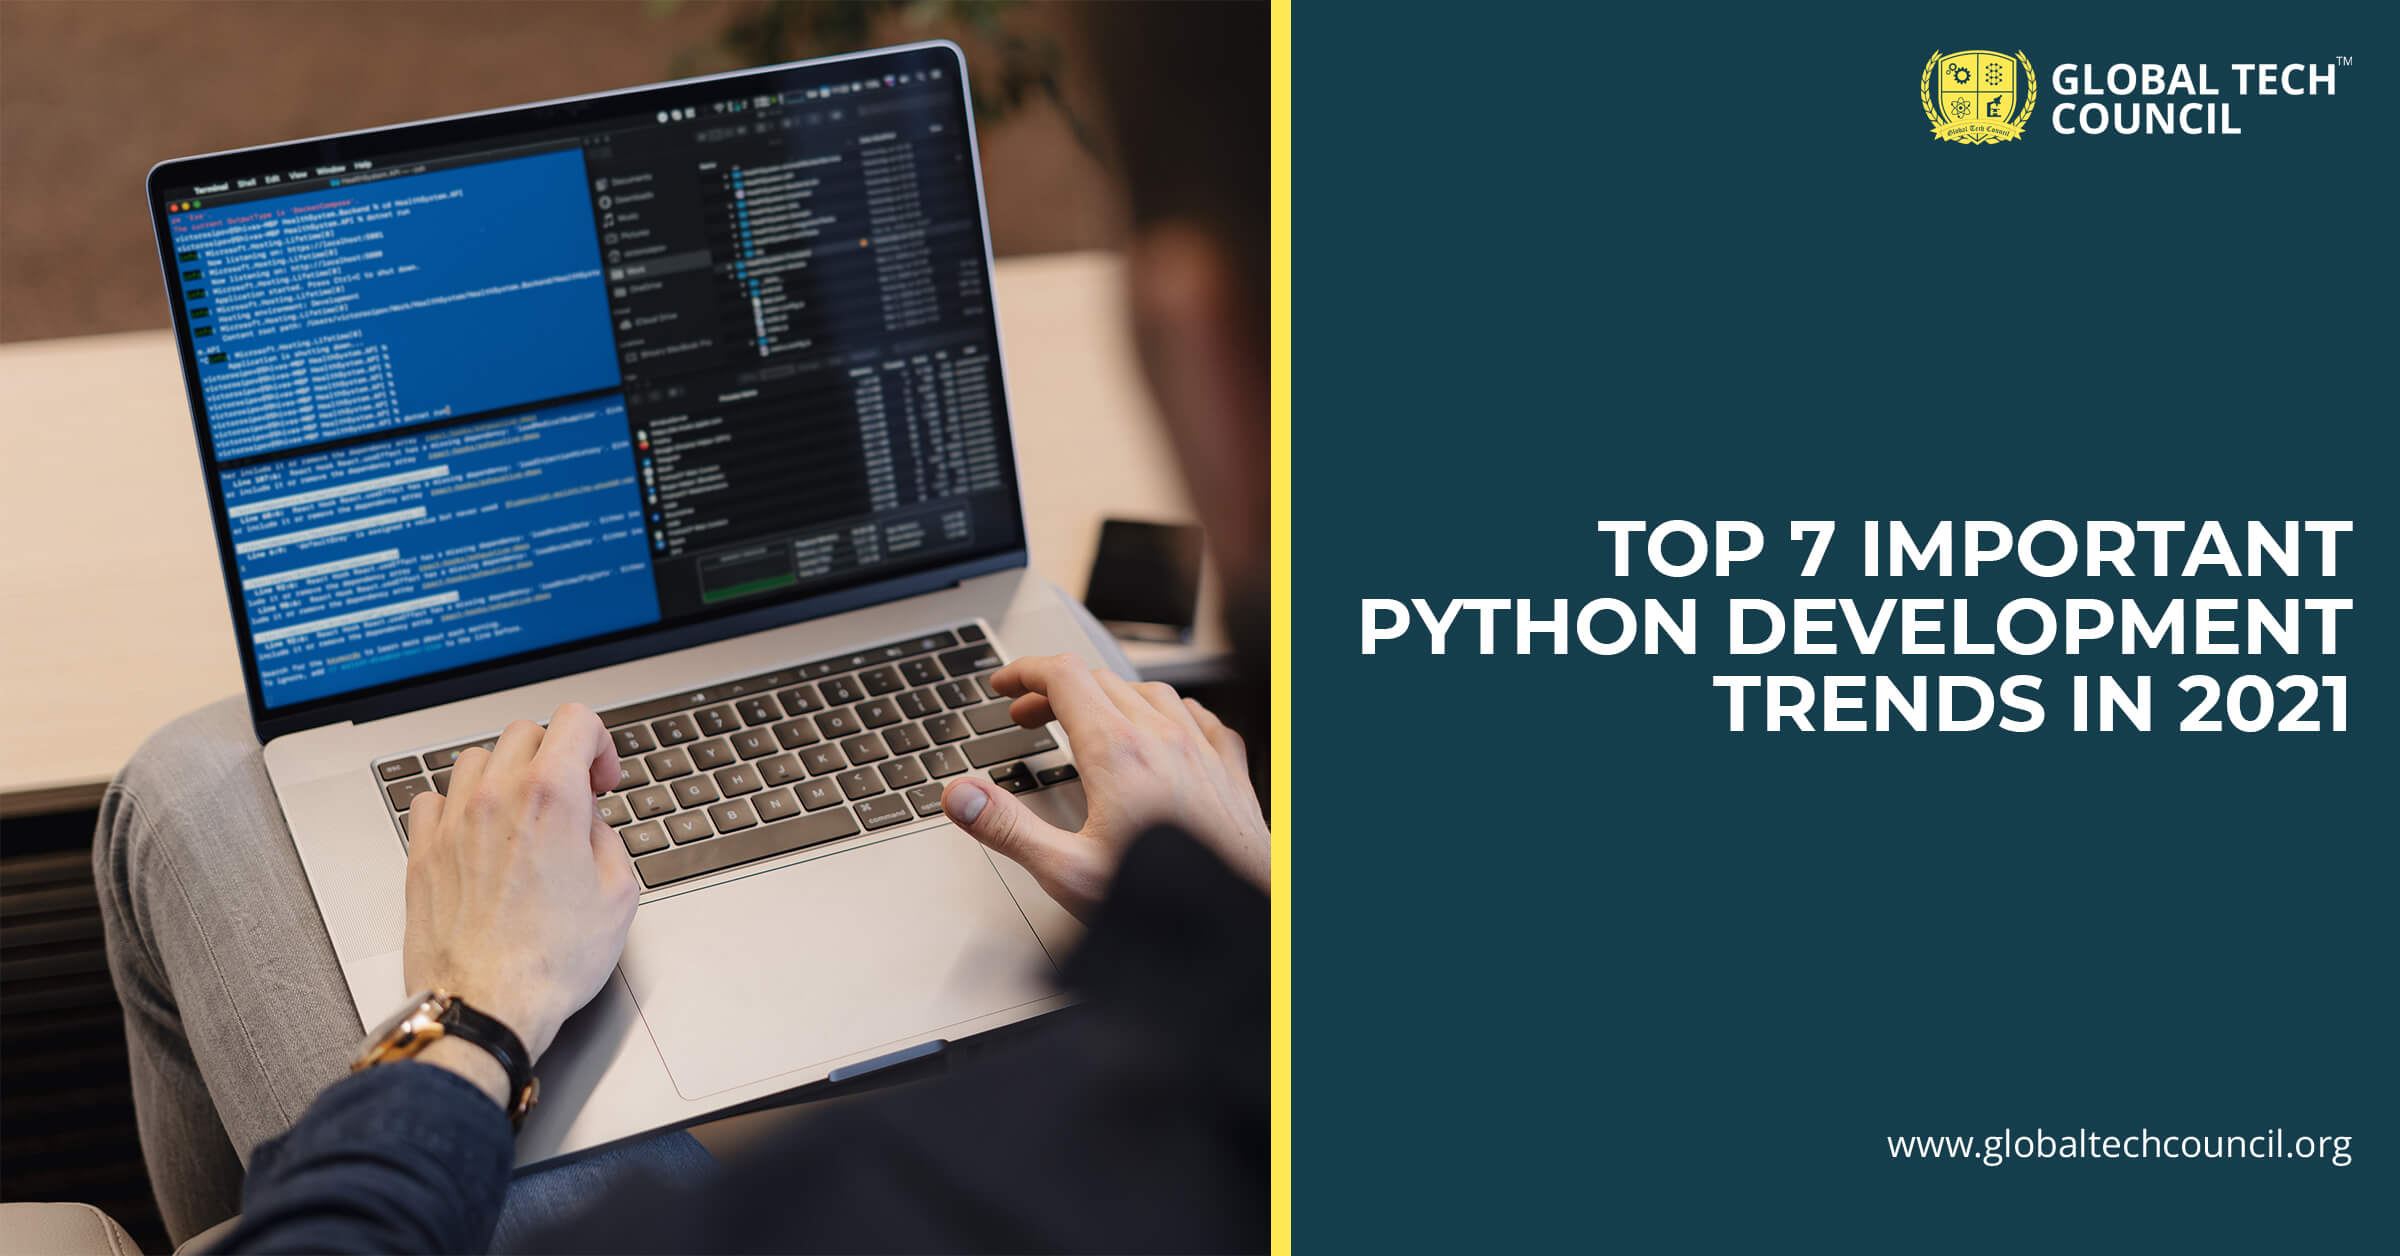 Top 7 Important Python Development Trends in 2021